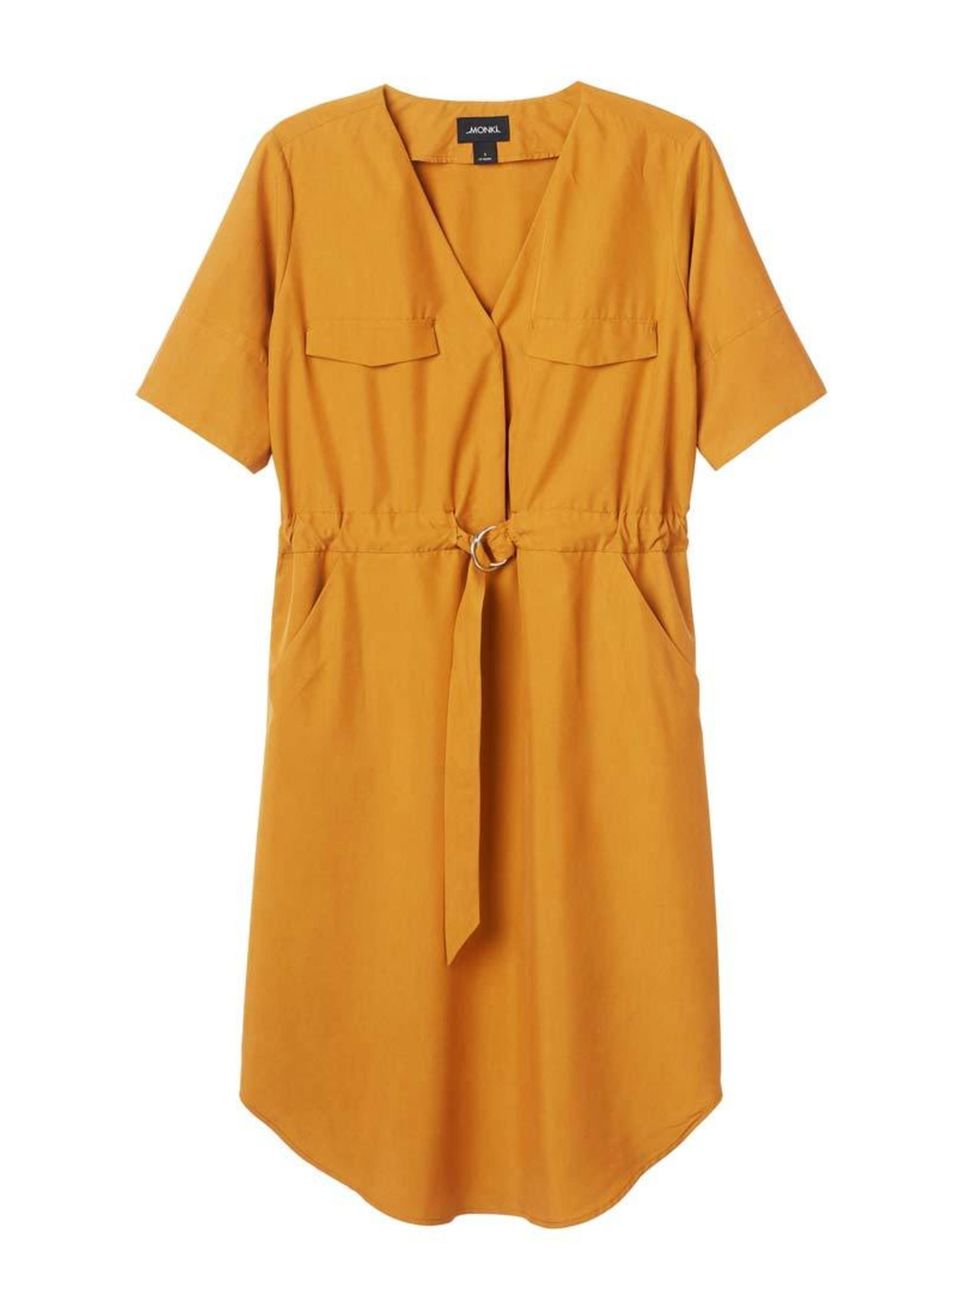 <p>A utilitarian style in an unexpected bright, as worn by Acting Features Assistant Maybelle Morgan.</p>

<p><a href="http://www.monki.com/View_all_new/Belen_dress/8668818-9336804.1#c-49930" target="_blank">Monki</a> dress, £35</p>